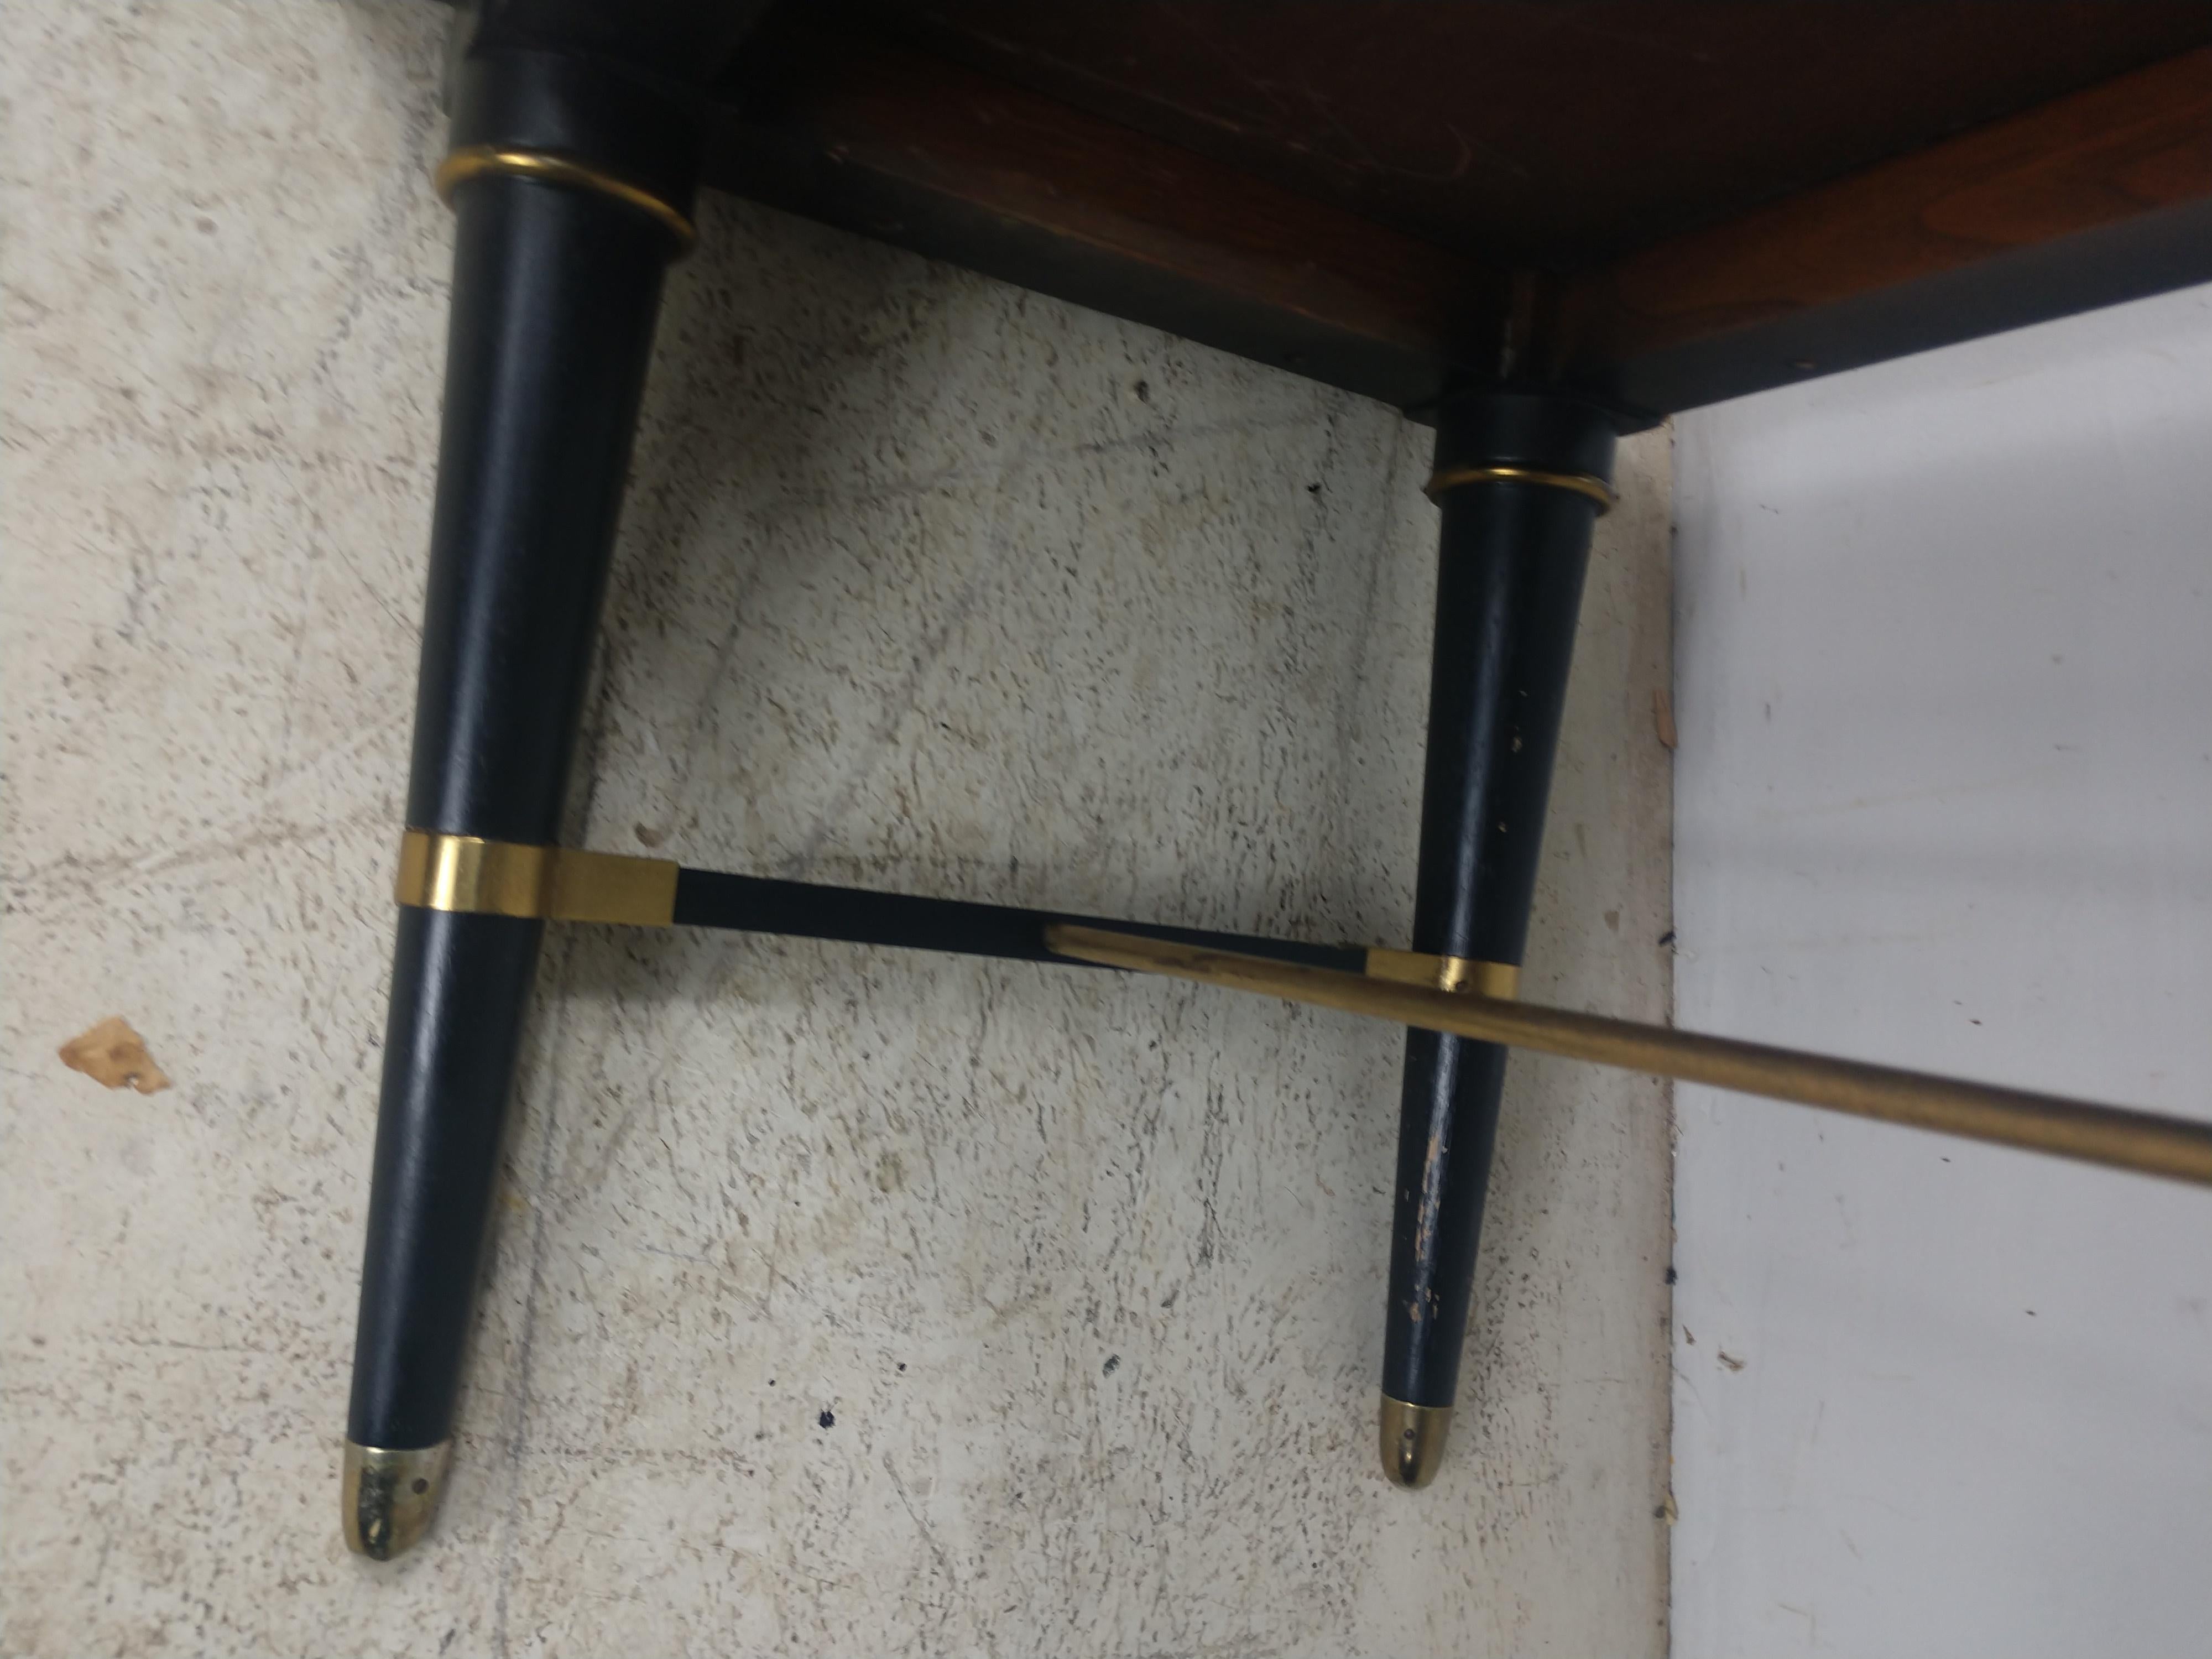 Simple and elegant form, six leg with center stretcher. Brass rod and other components connecting the legs. Long and narrow, 80 x 18 with a hgt. of 15. Shows normal wear.